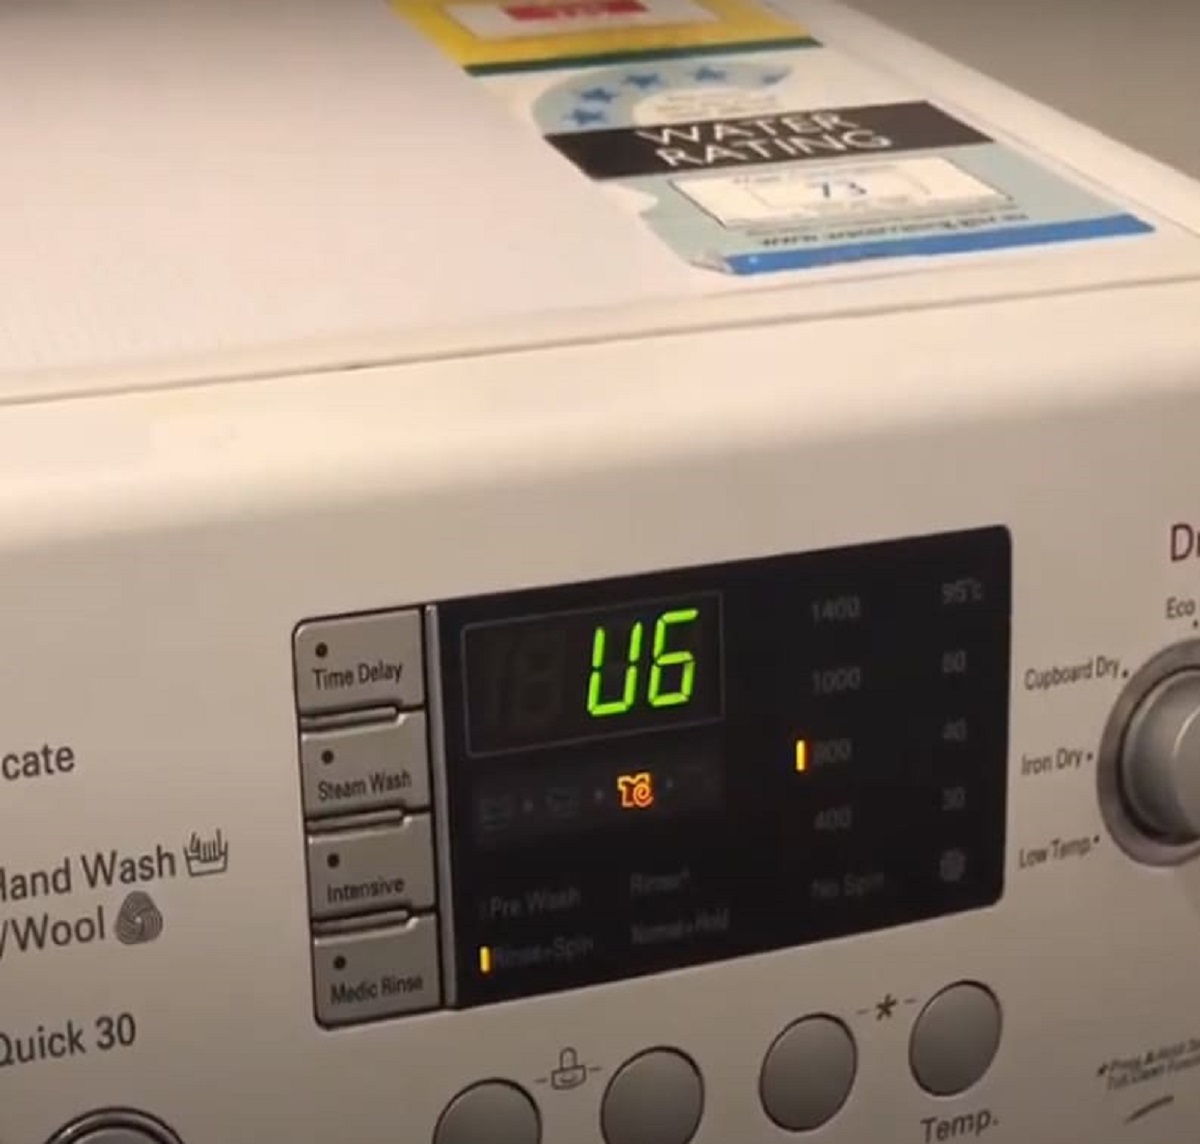 What Does U6 Mean On A Samsung Washer